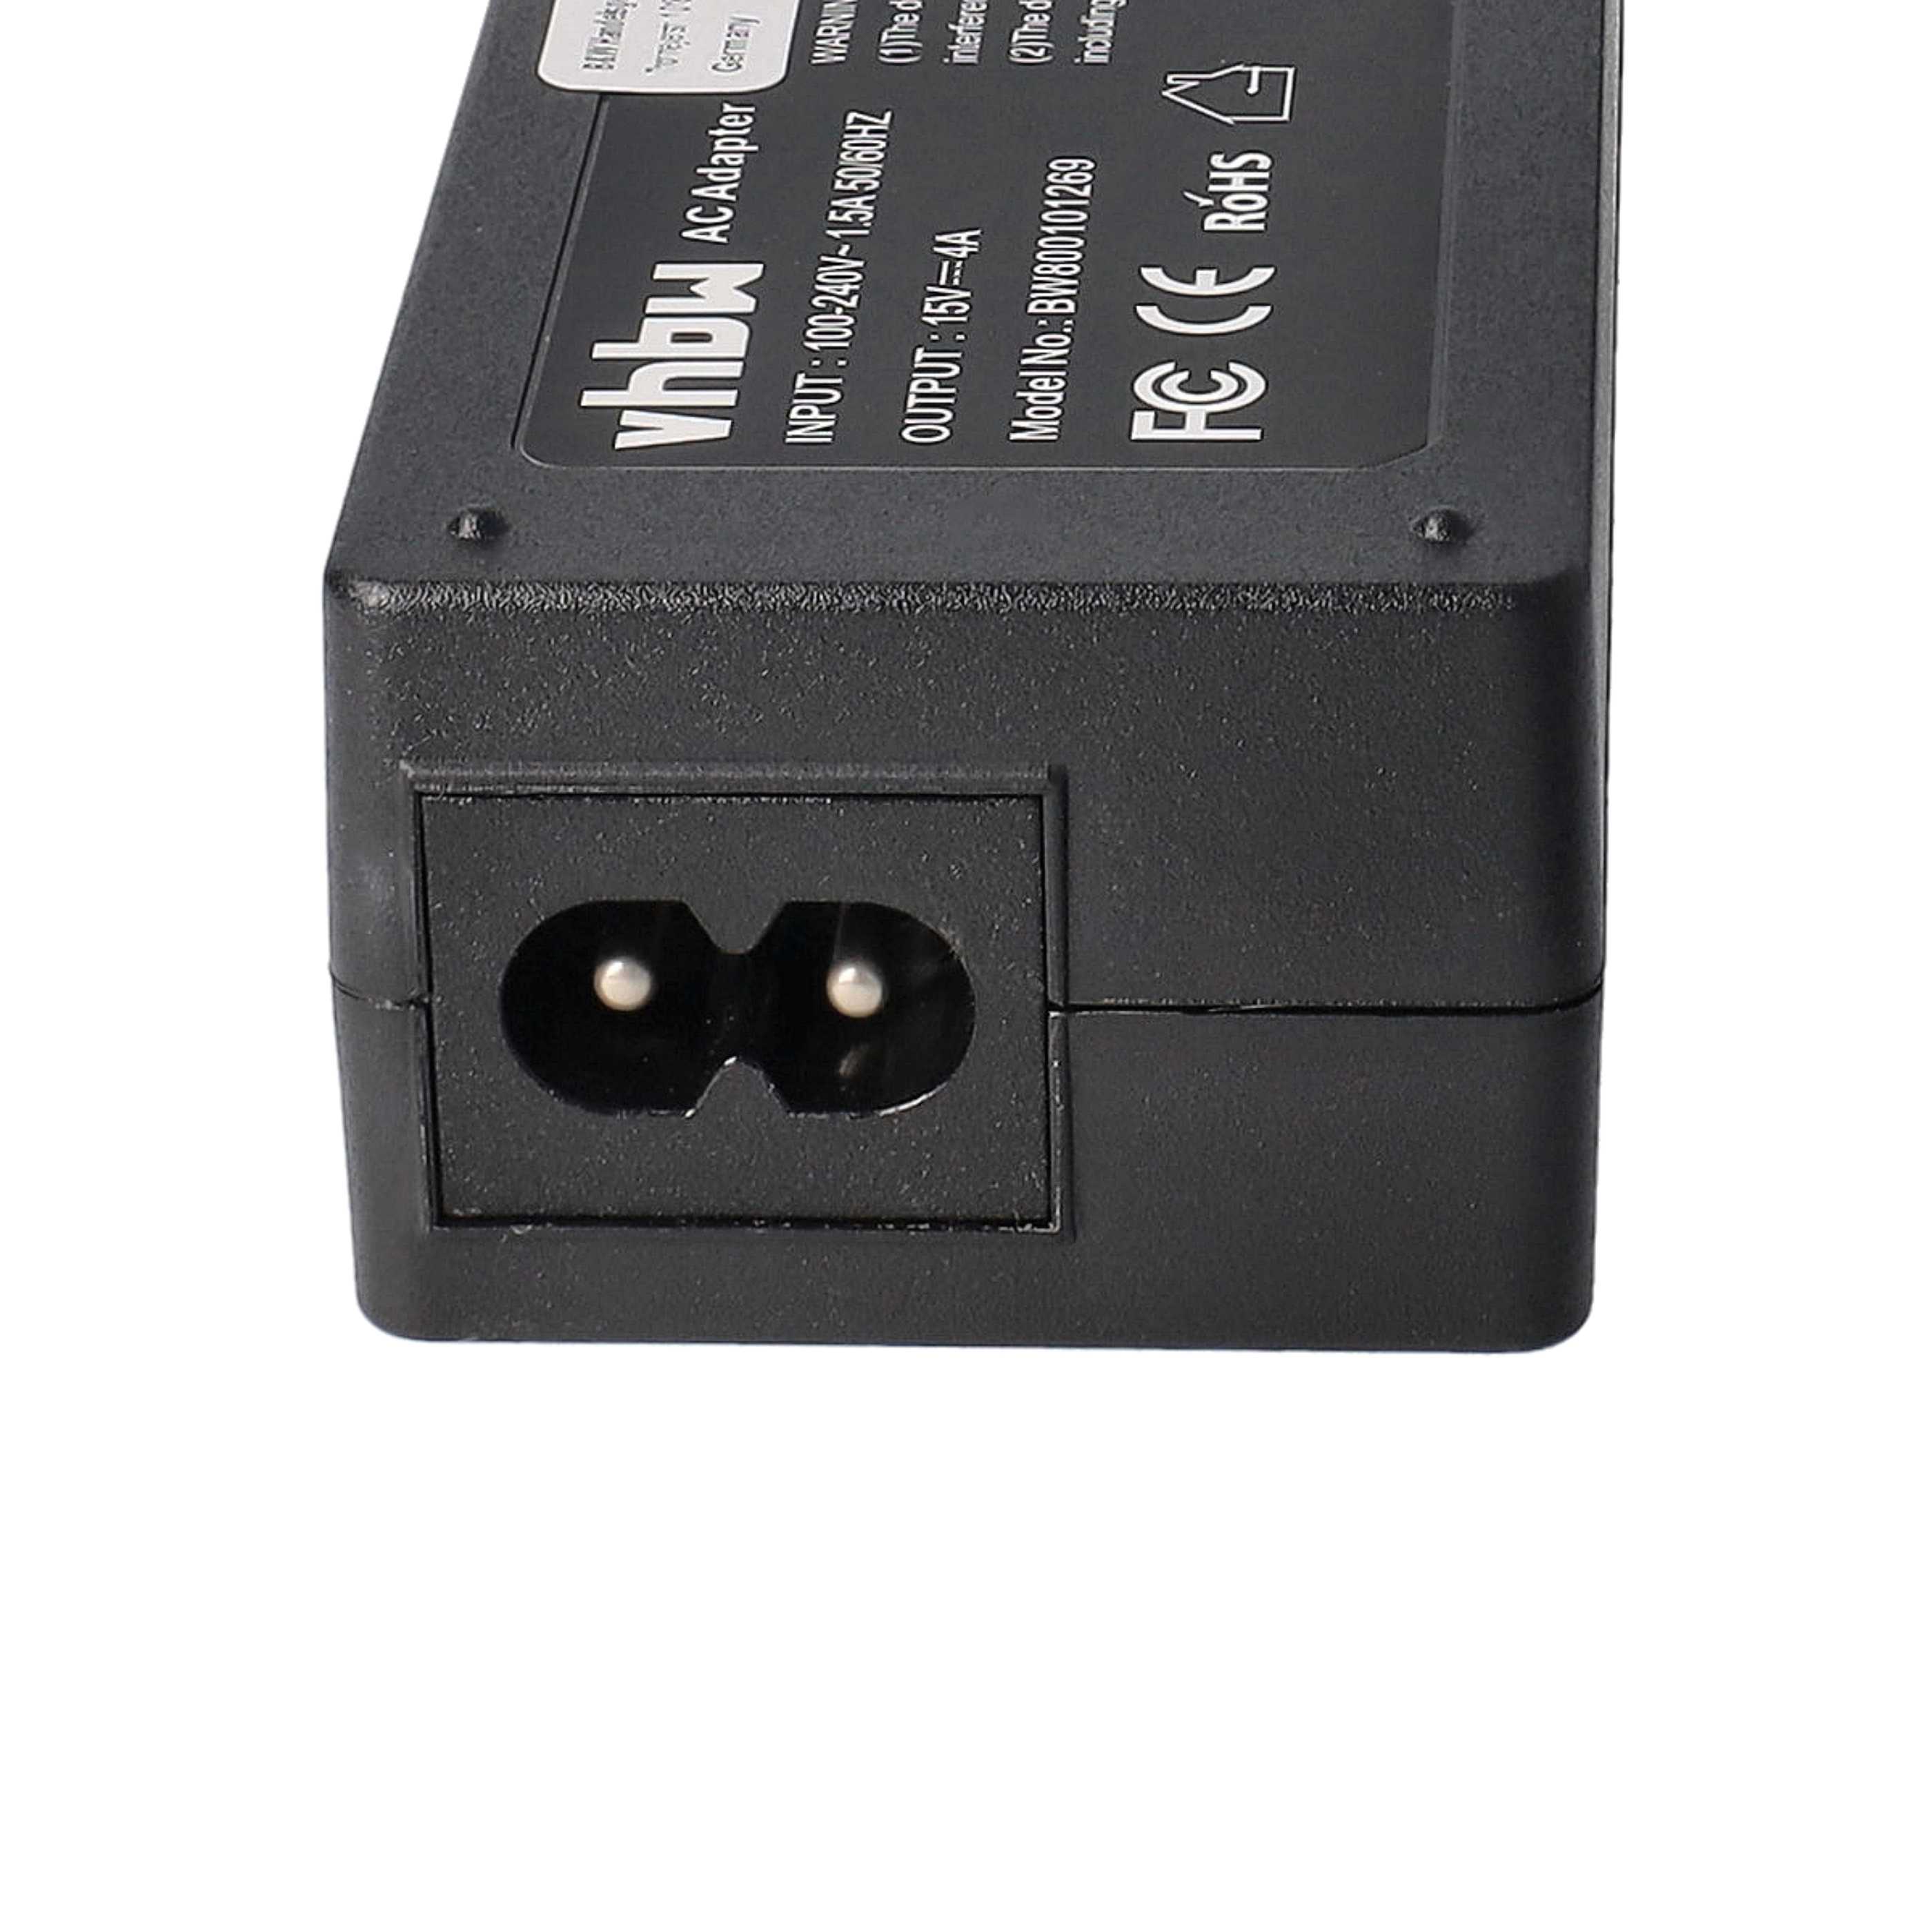 Mains Power Adapter replaces Toshiba PA2444U for ToshibaNotebook, 60 W